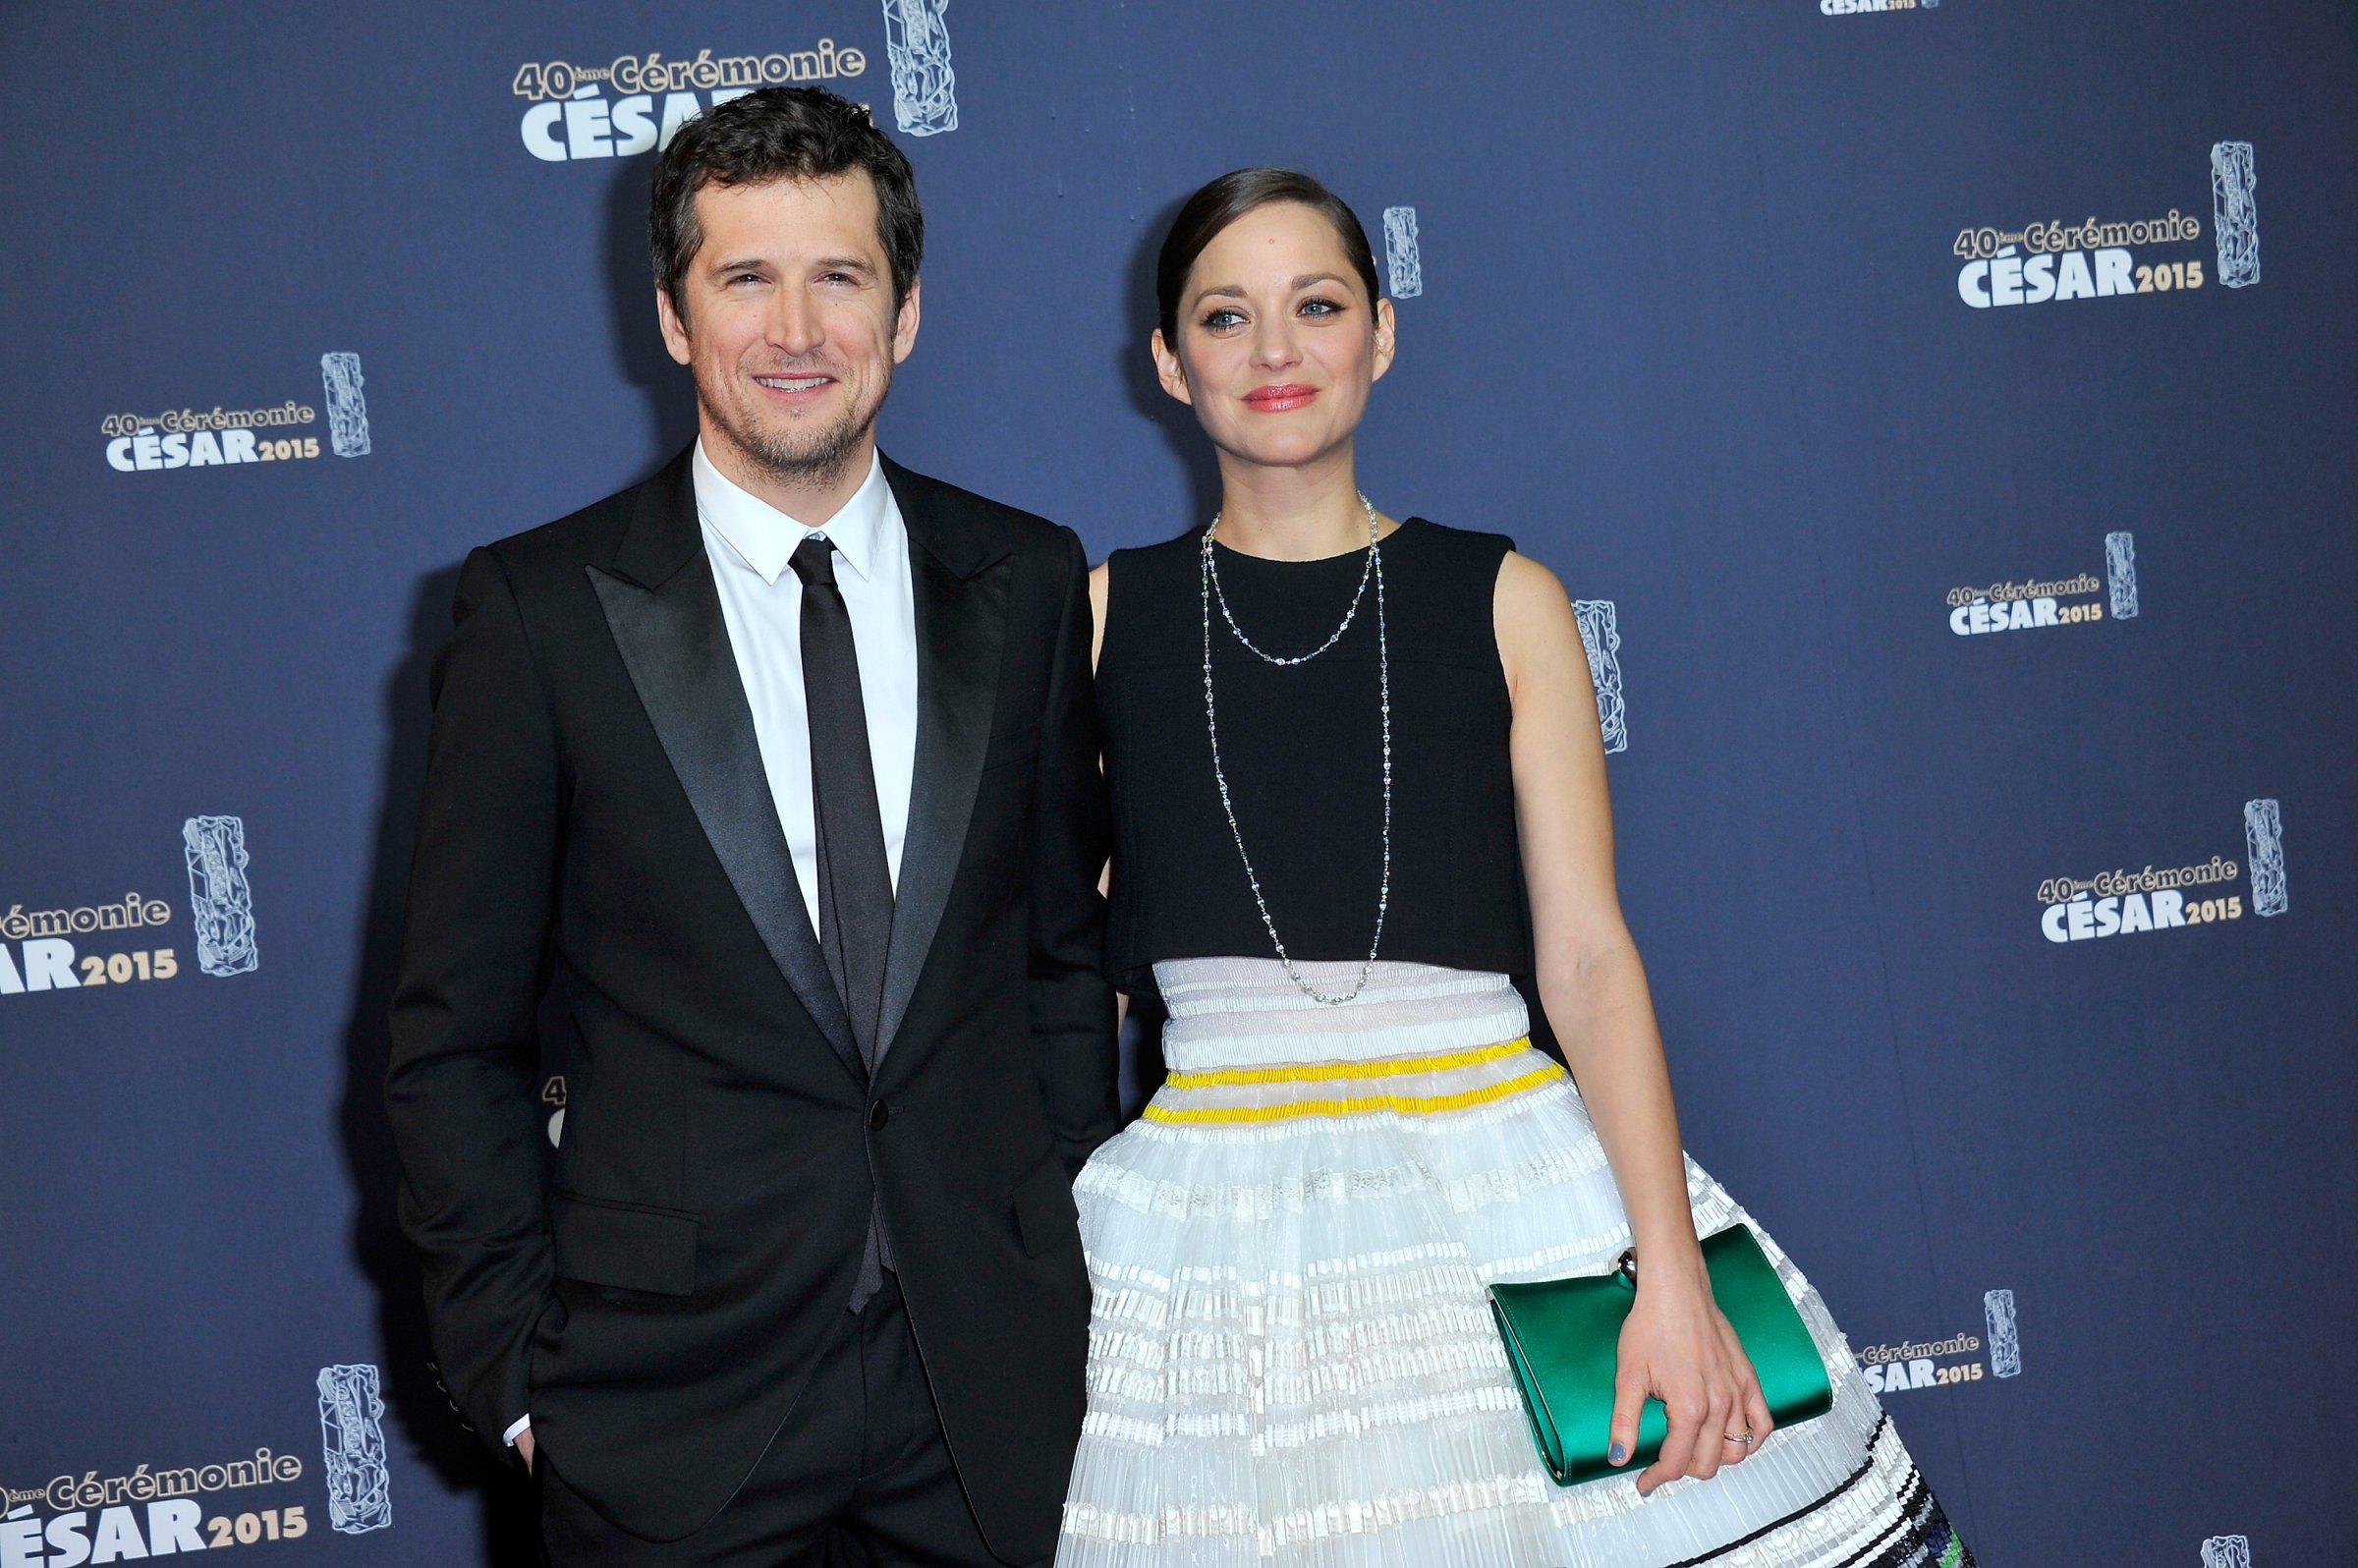 Guillaume Canet and Marion Cotillard attend the 40th Cesar Film Awards at Theatre du Chatelet on February 20, 2015 in Paris, France.